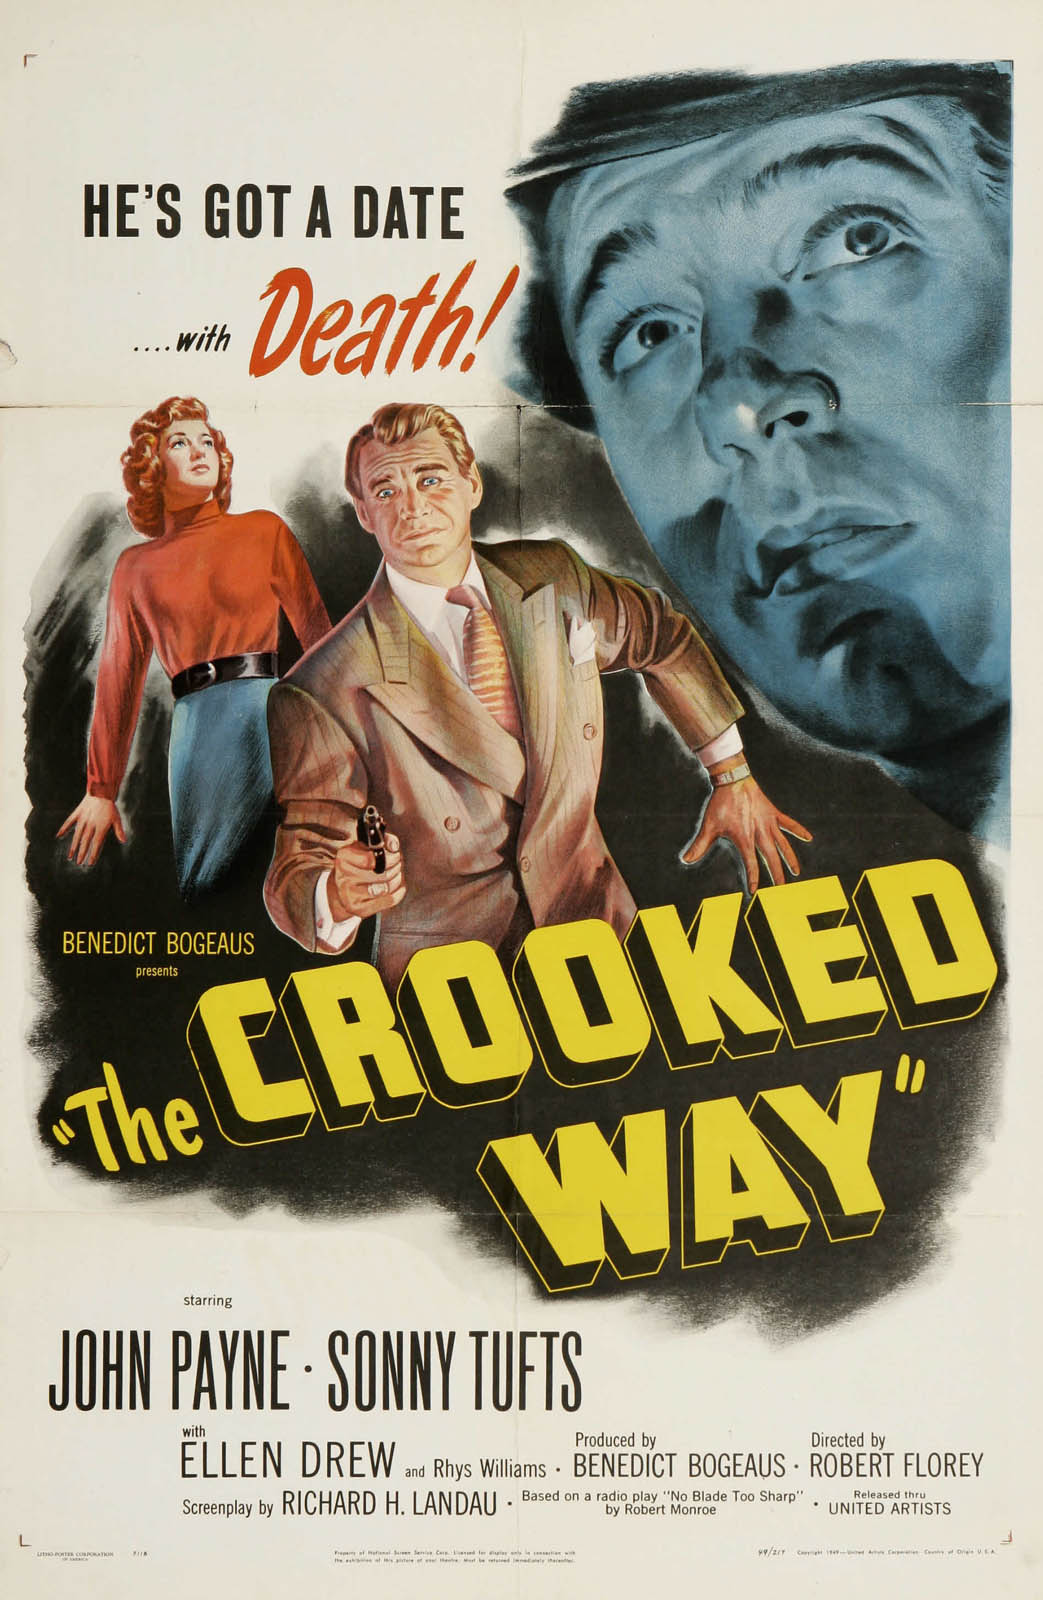 CROOKED WAY, THE